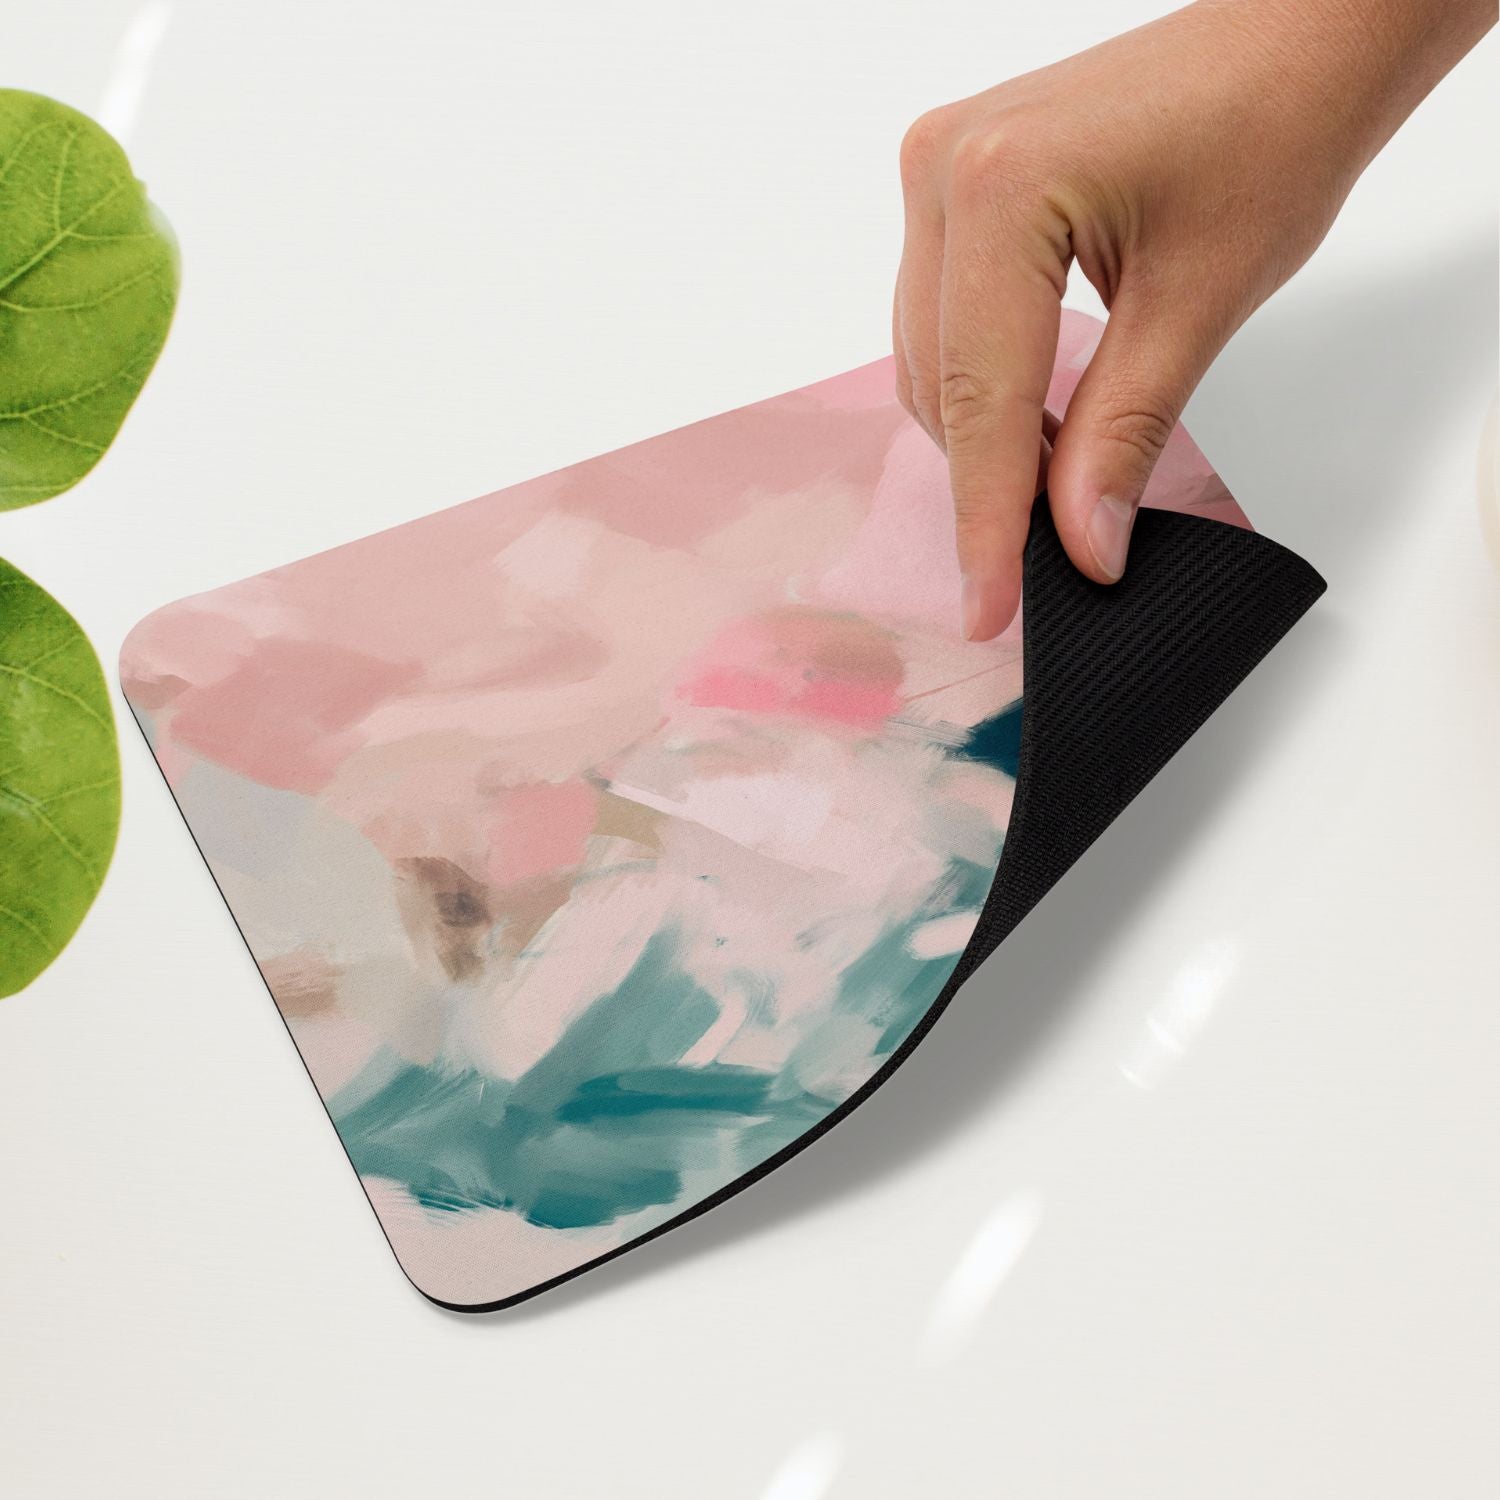 Flamingo, colorful mouse pad for styling your office desk. Featuring artwork by Parima Studio. Home office styling accessories, cubicle styling accessories.